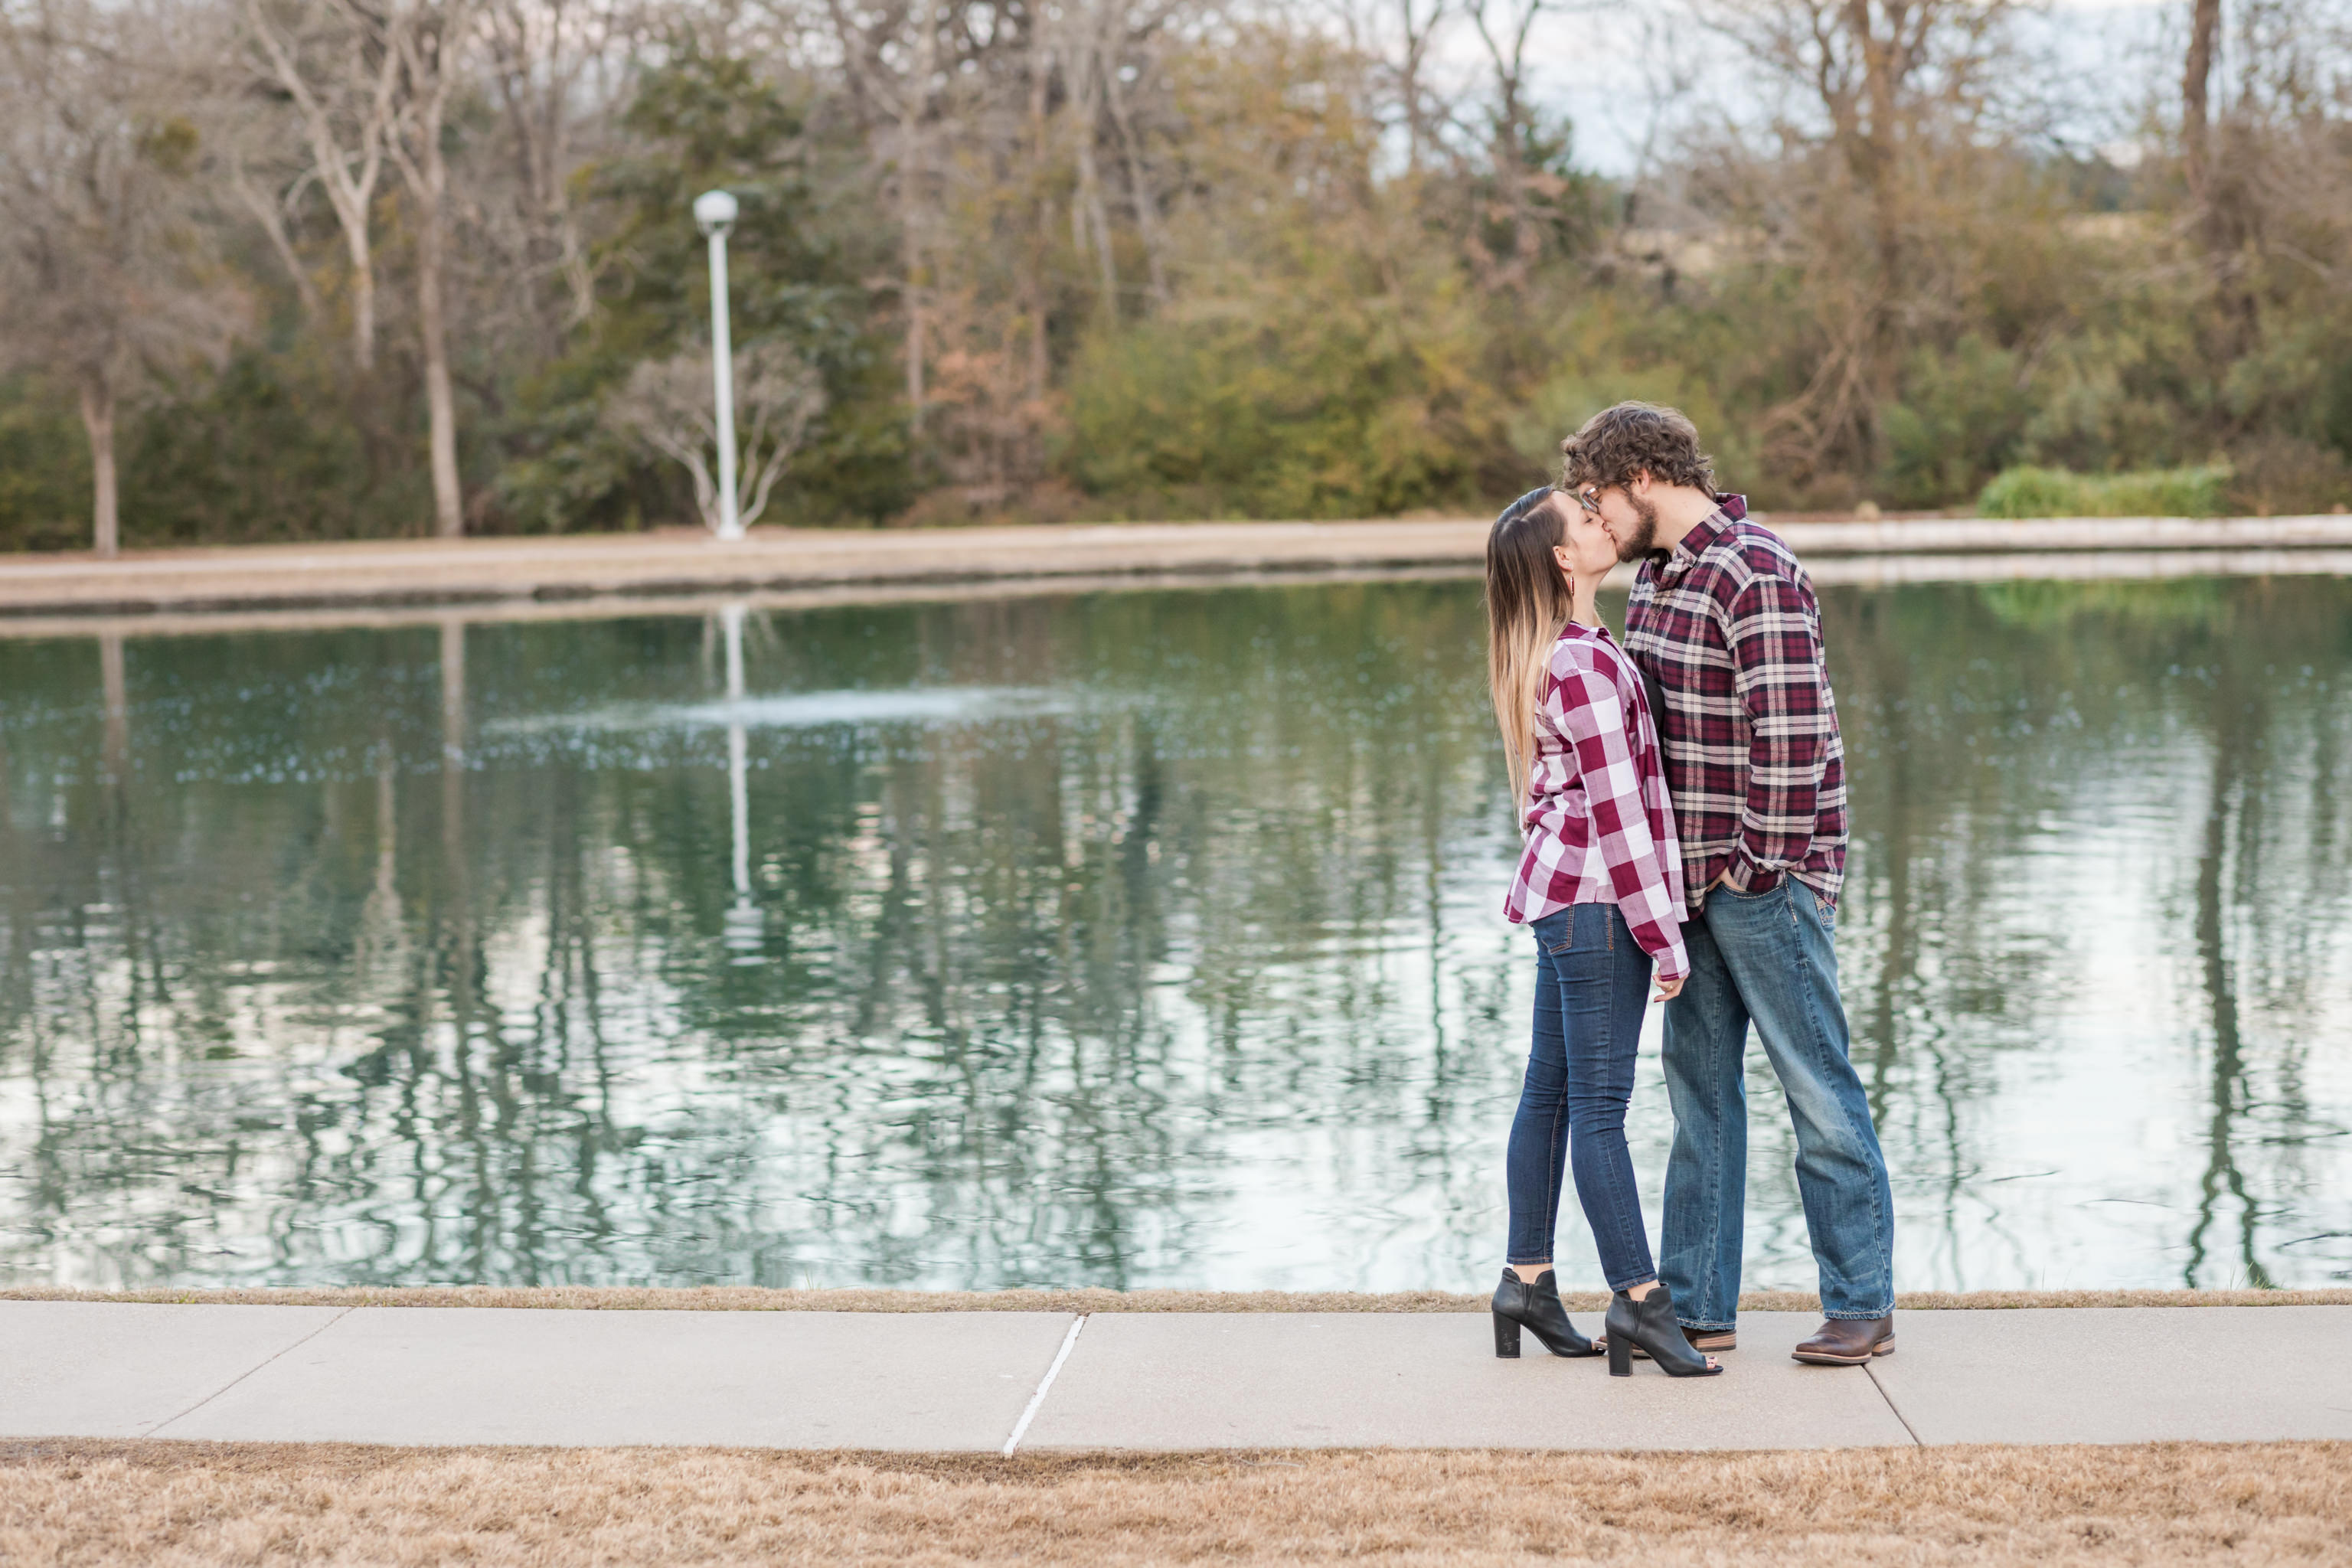 An Engagement Session at Texas A&M in College Station, TX by Dawn Elizabeth Studios, San Antonio Wedding Photographer